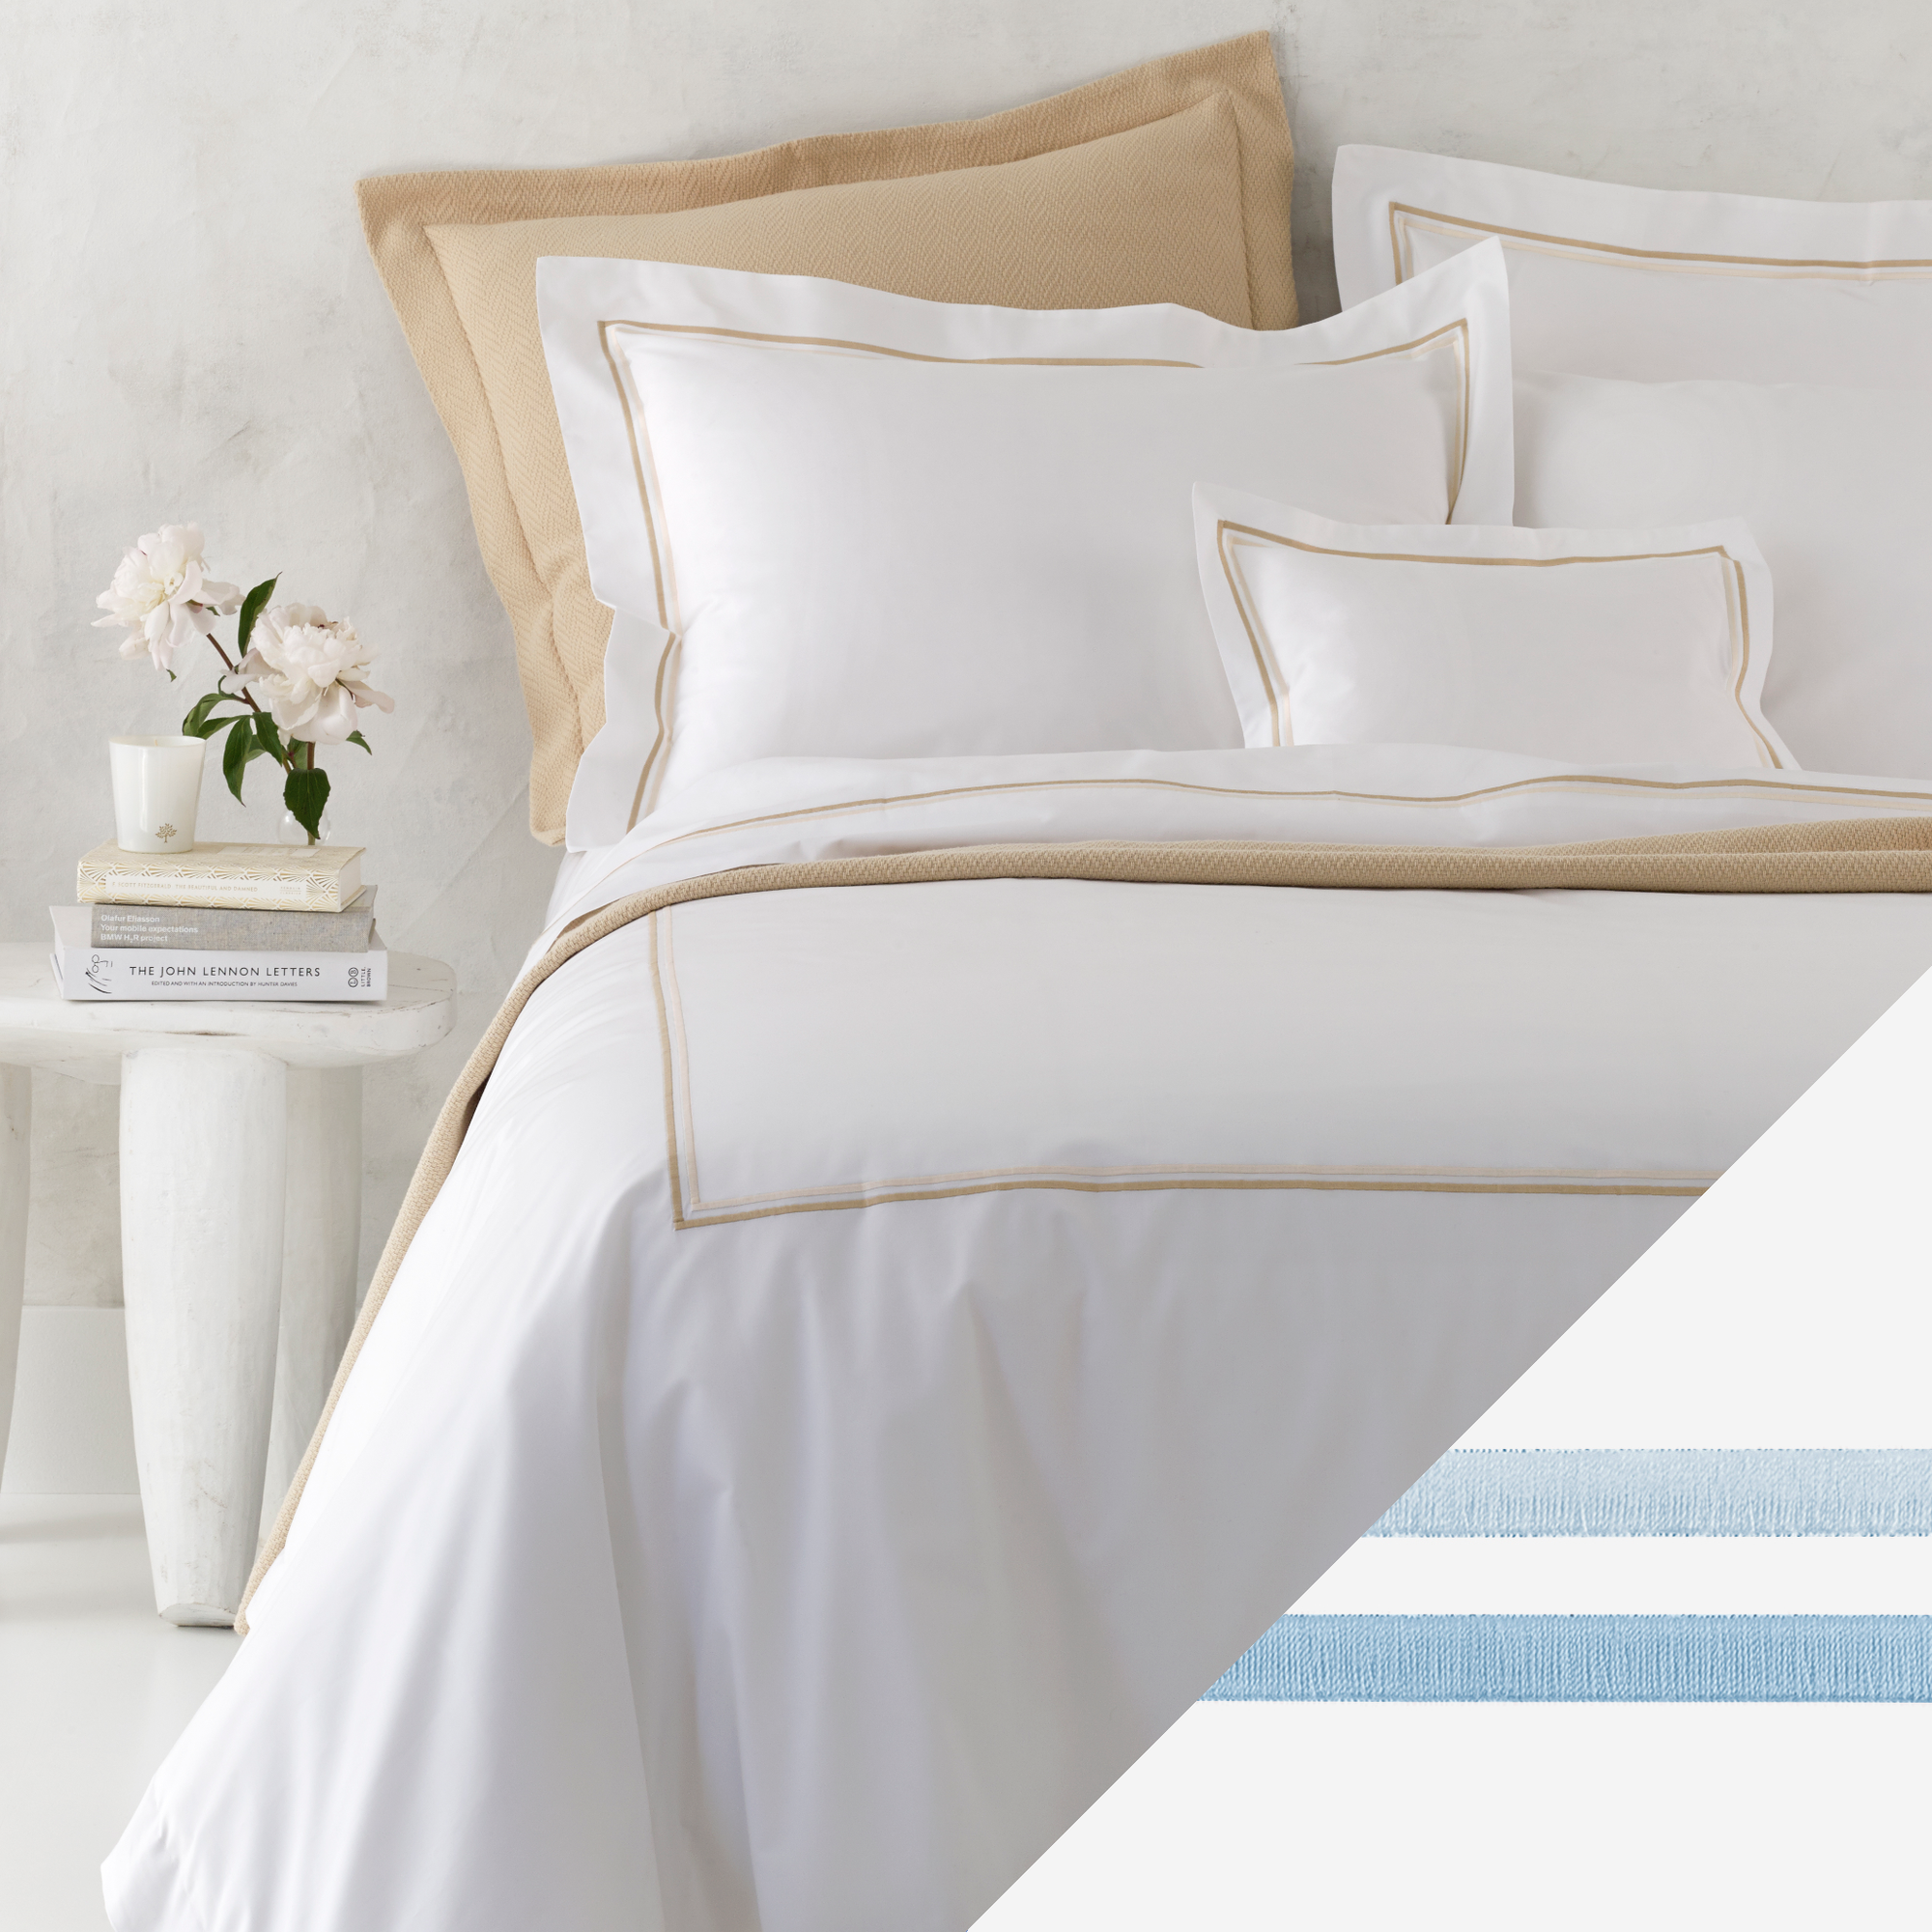 Corner Picture of Matouk Essex High End Bedding with Swatch in Lightblue Color